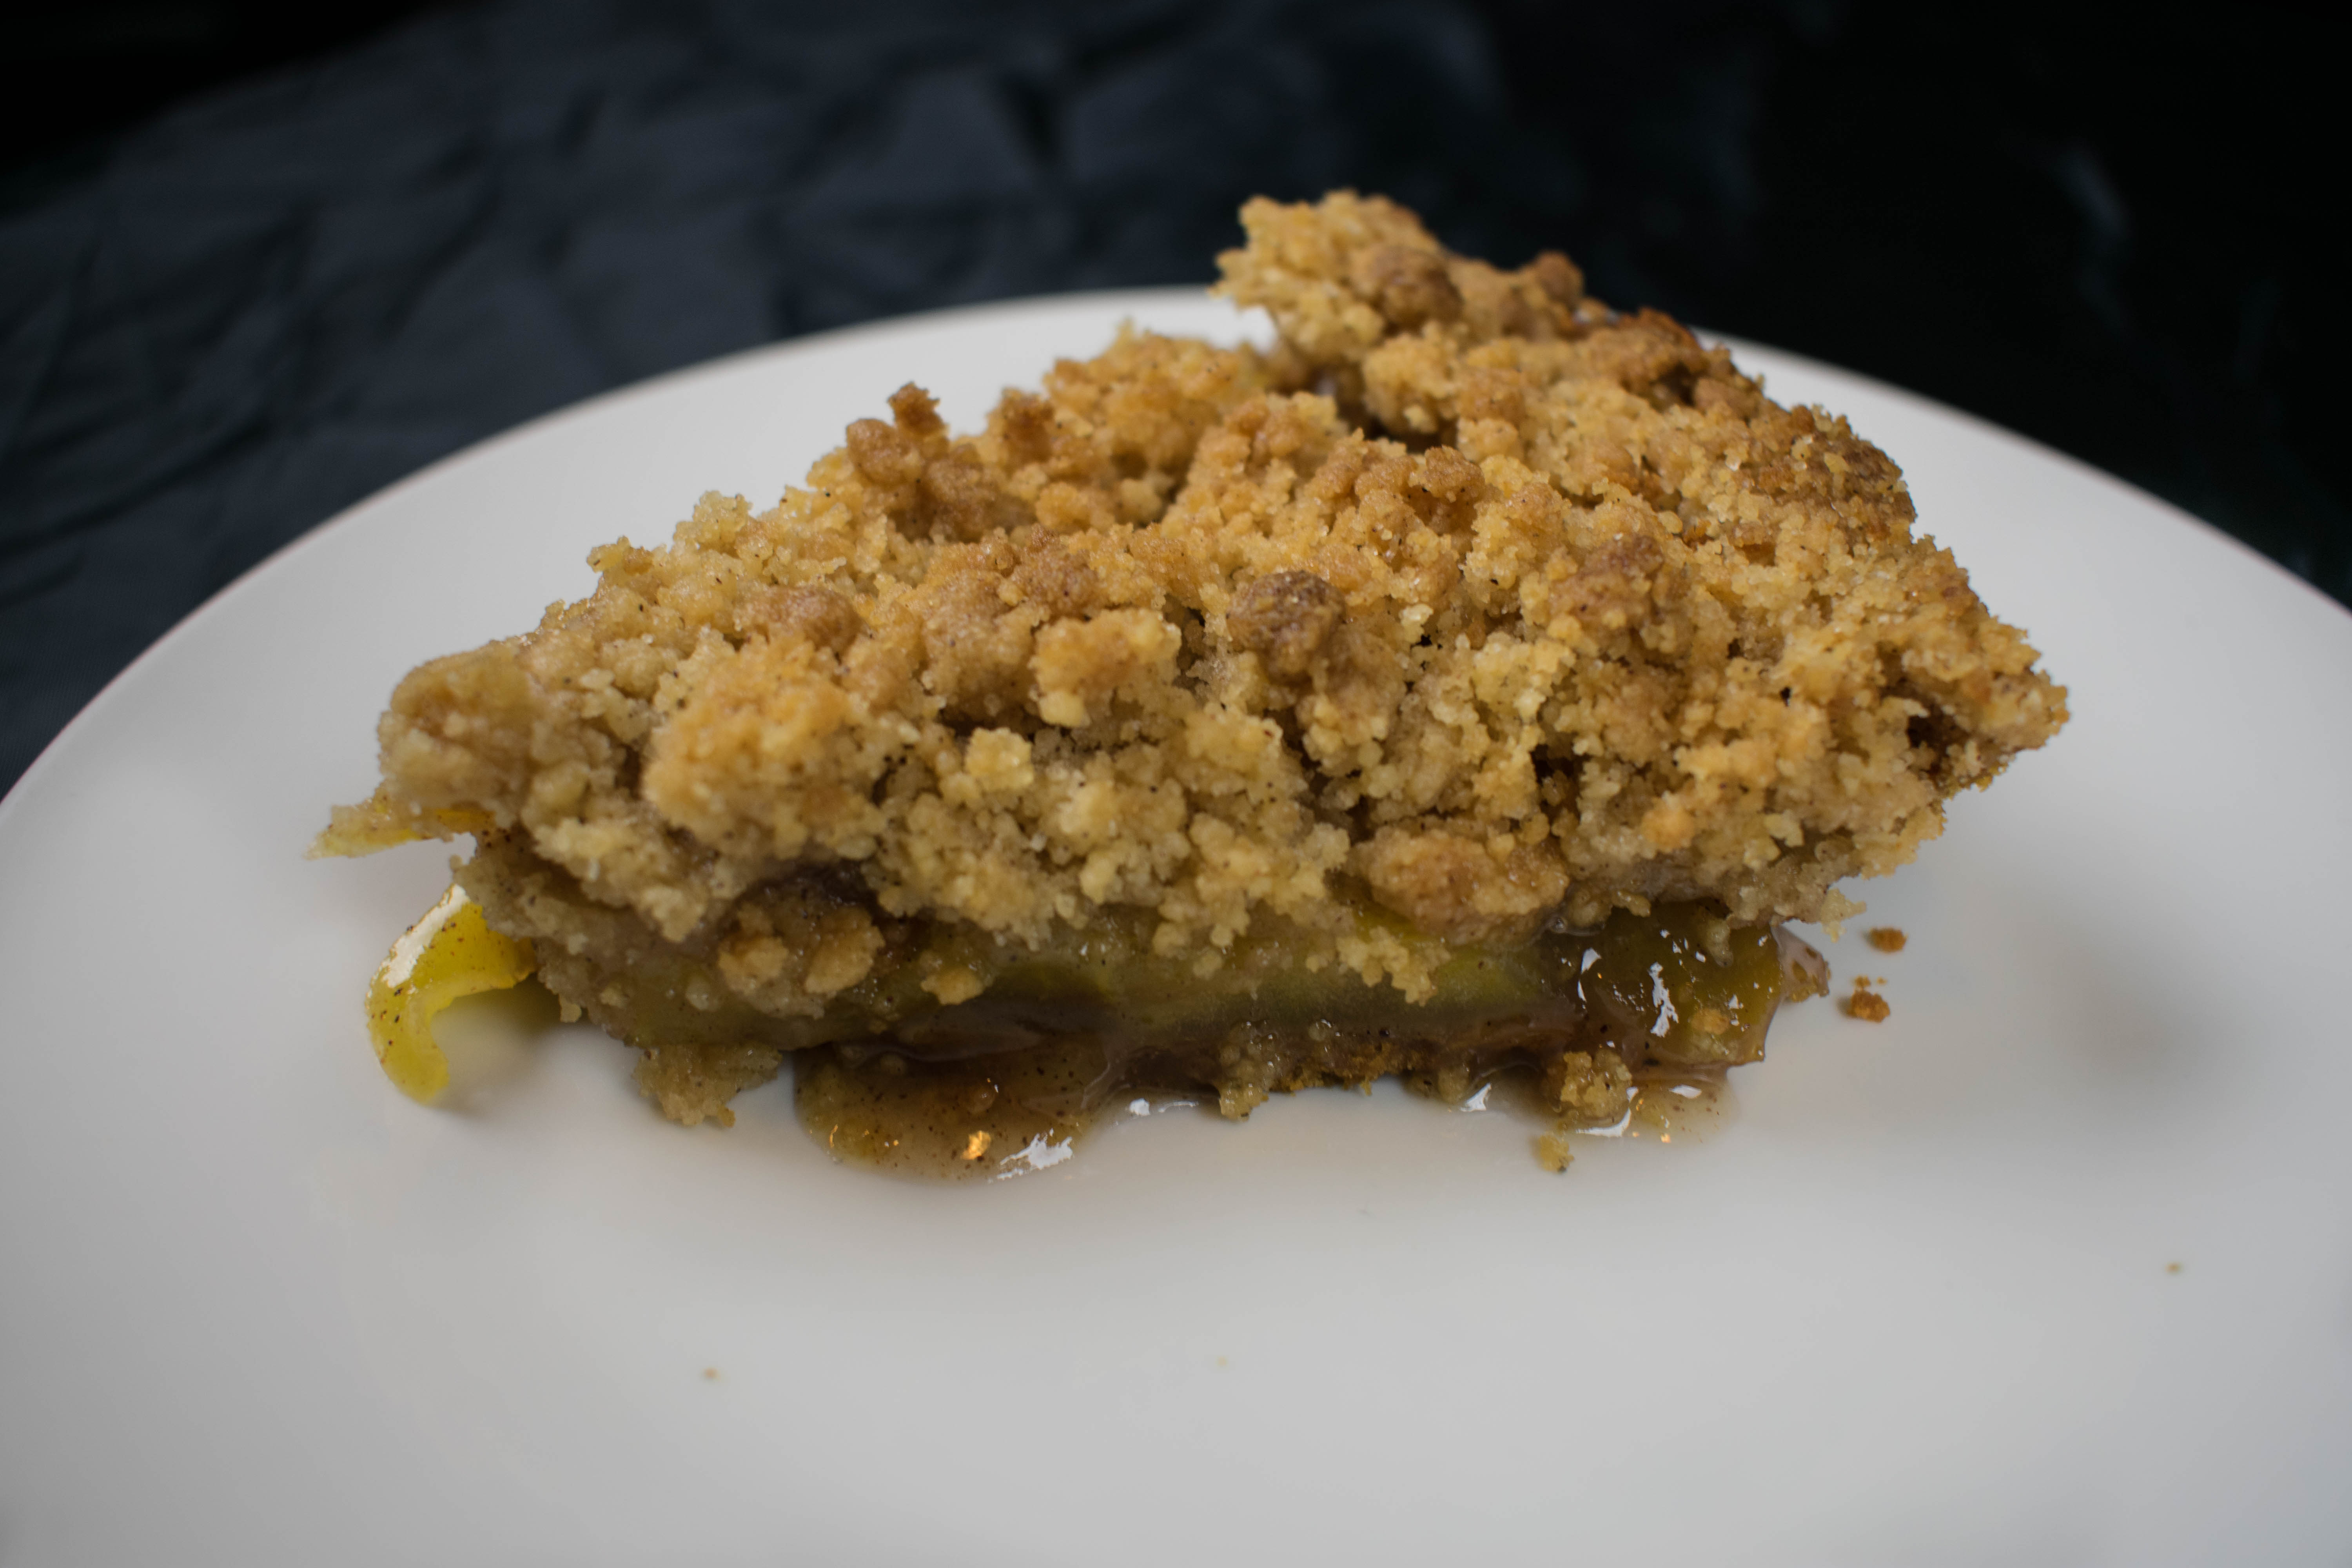 Cinnamon apple pie with crumble topping